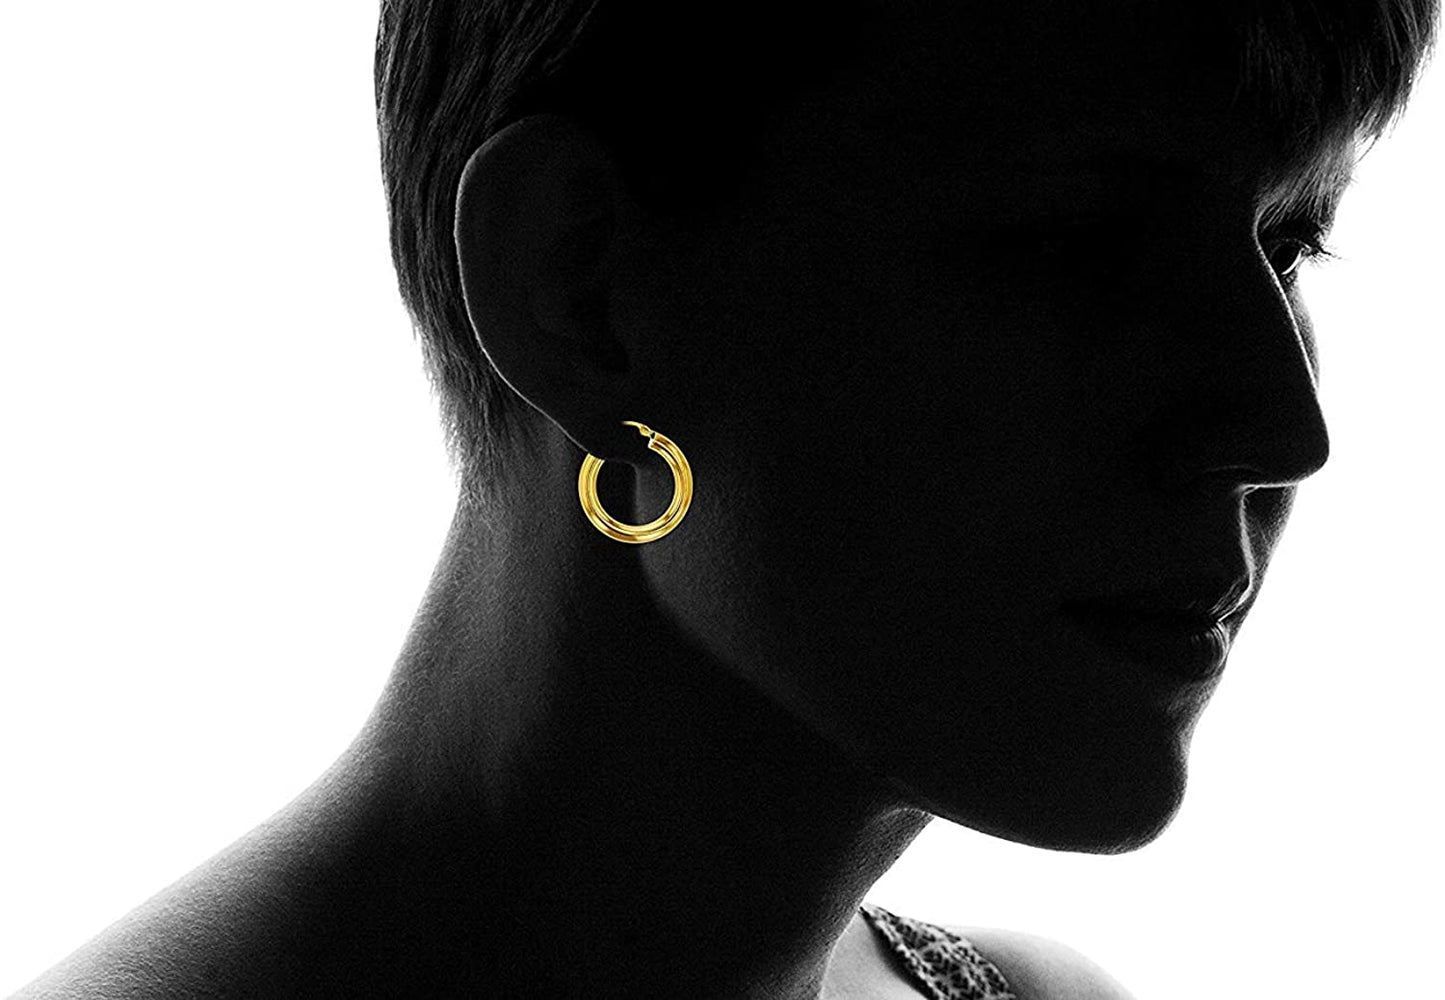 14Karat Simple Classic Jewelry-Real Solid Yellow Gold Hoops Earrings.gold earrings, hoop earrings, 14k gold earrings, earrings,14k yellow gold, gold earrings for women, 14 karat gold earrings, 14k gold hoop earrings, gold earrings for women 14k real gold, gold jewelry, gold studs, gold earrings studs, earrings gold, real gold earrings, 14k gold earrings for women, small gold earrings14Karat Simple Classic Jewelry-